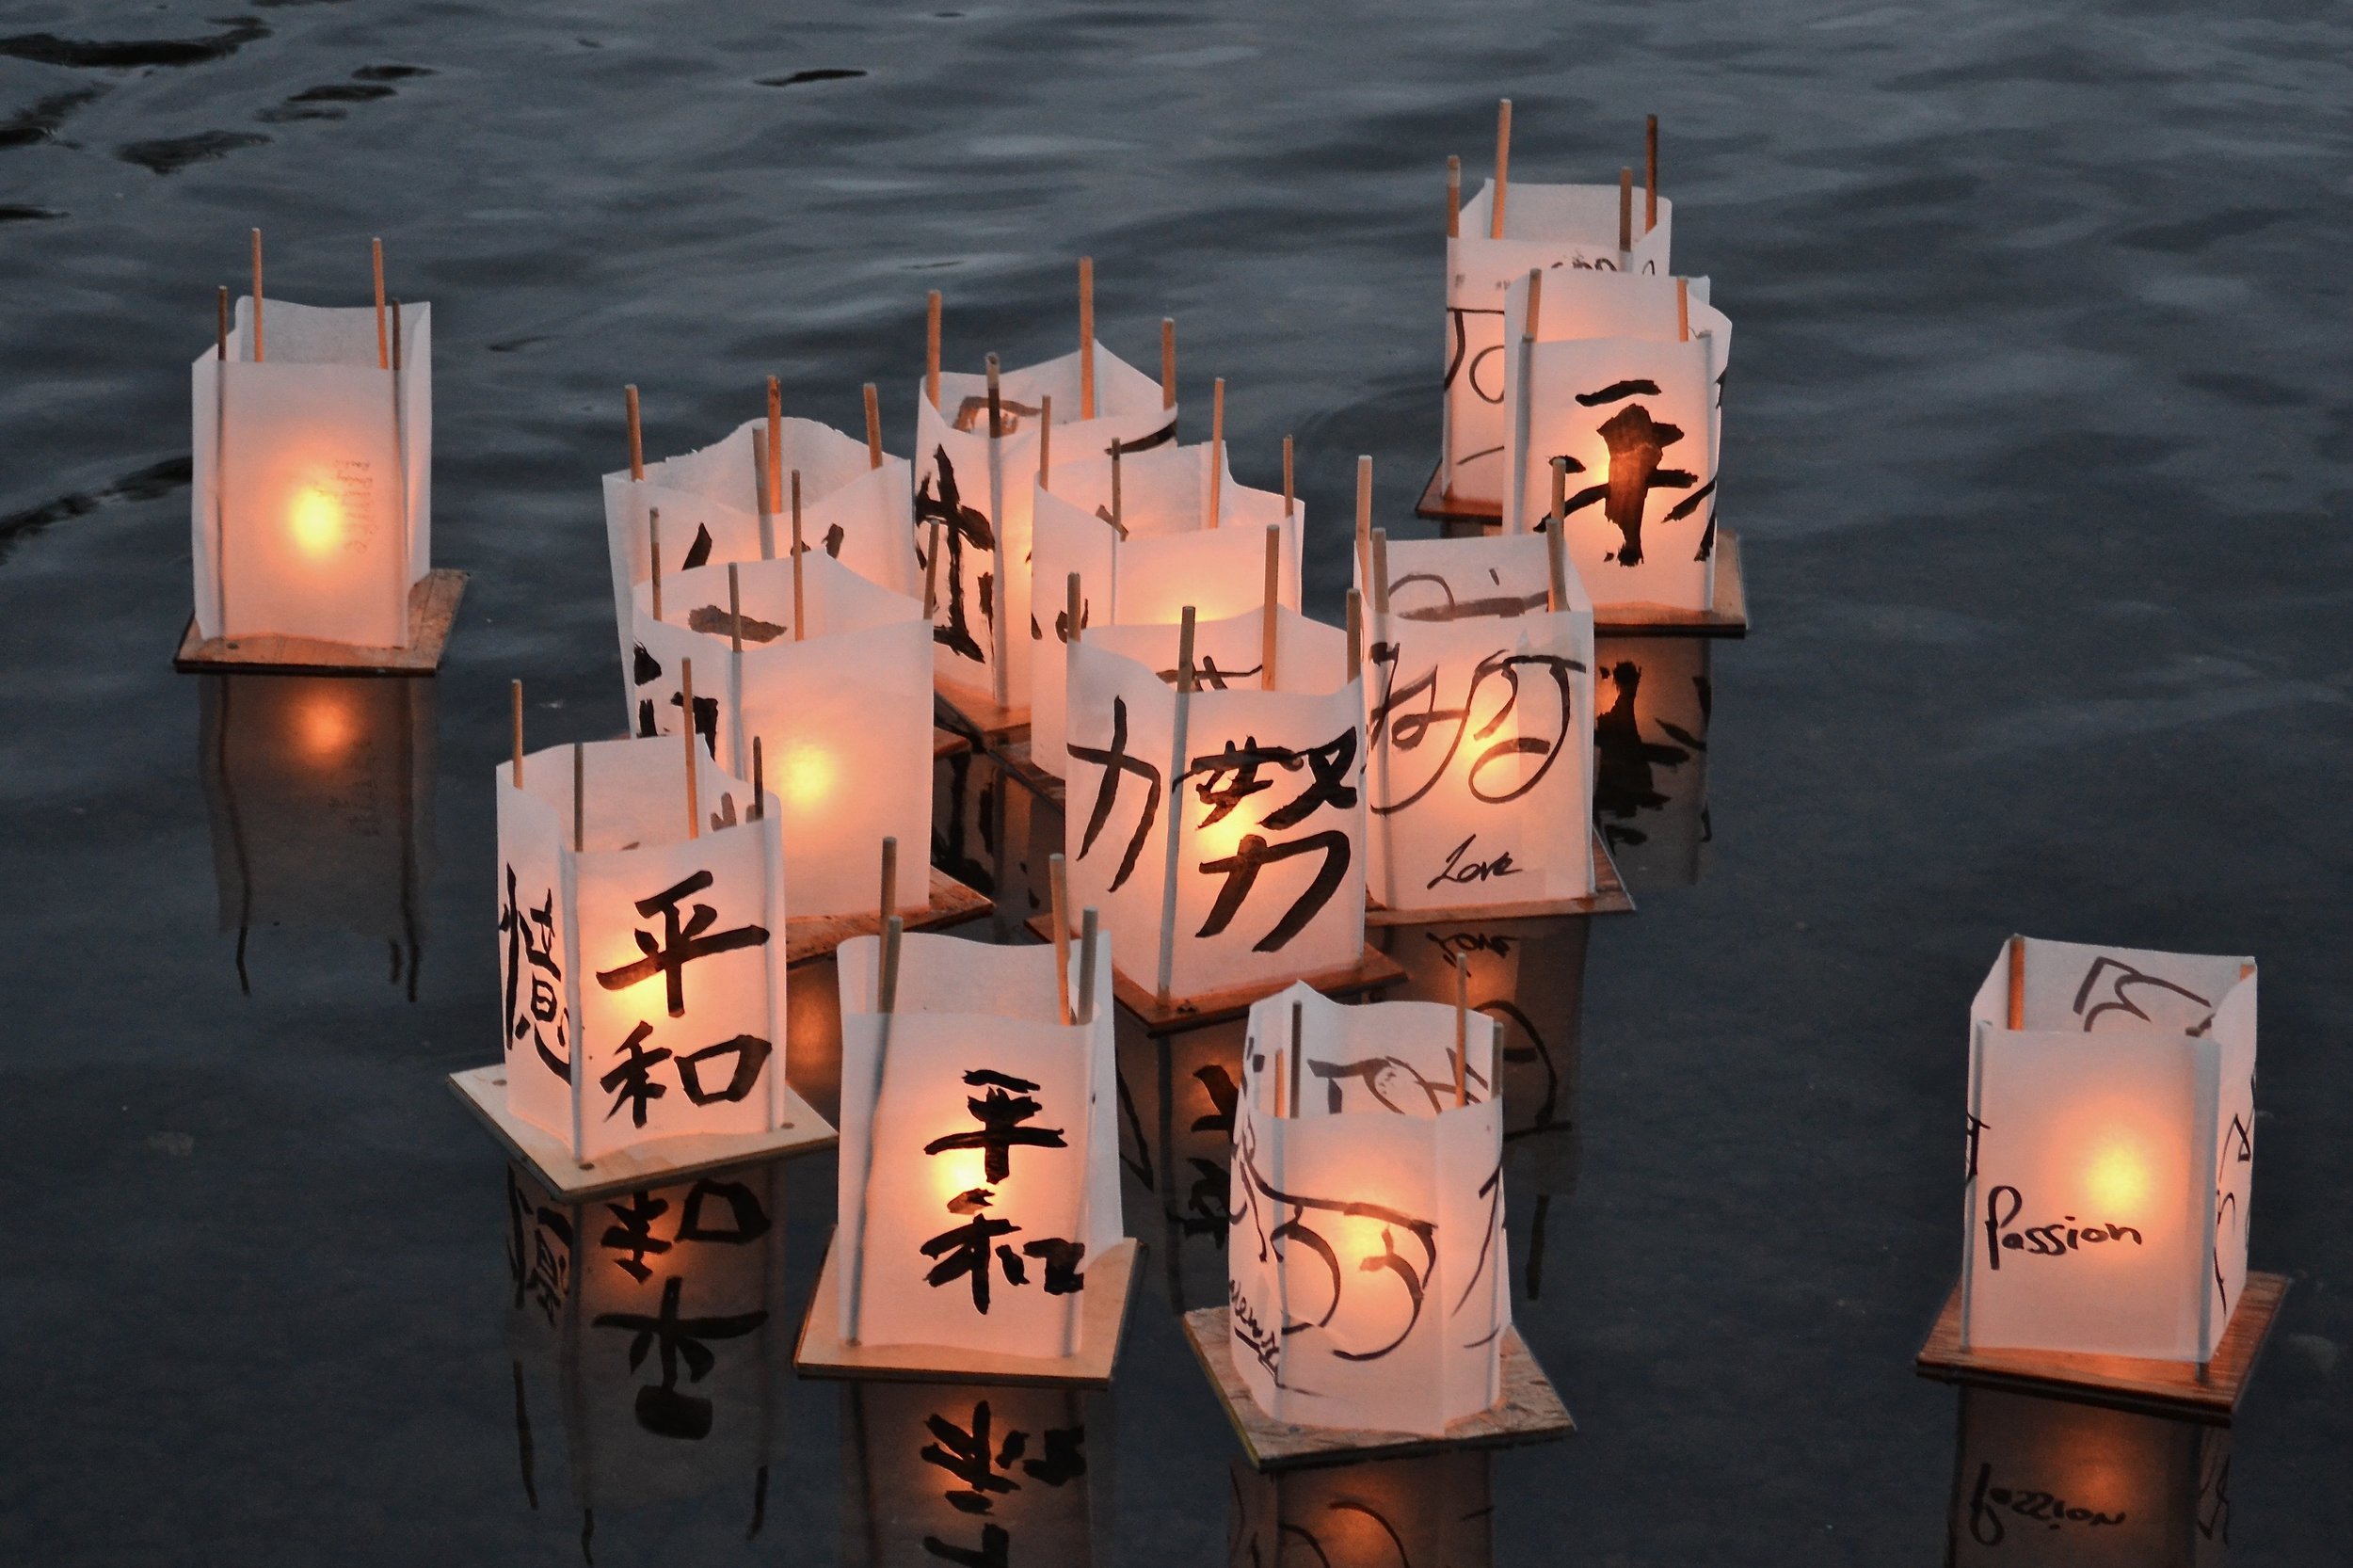    From Hiroshima to Hope  ’s annual lantern floating ceremony; honoring victims of the atomic bombings of Hiroshima and Nagasaki and all victims of war. 